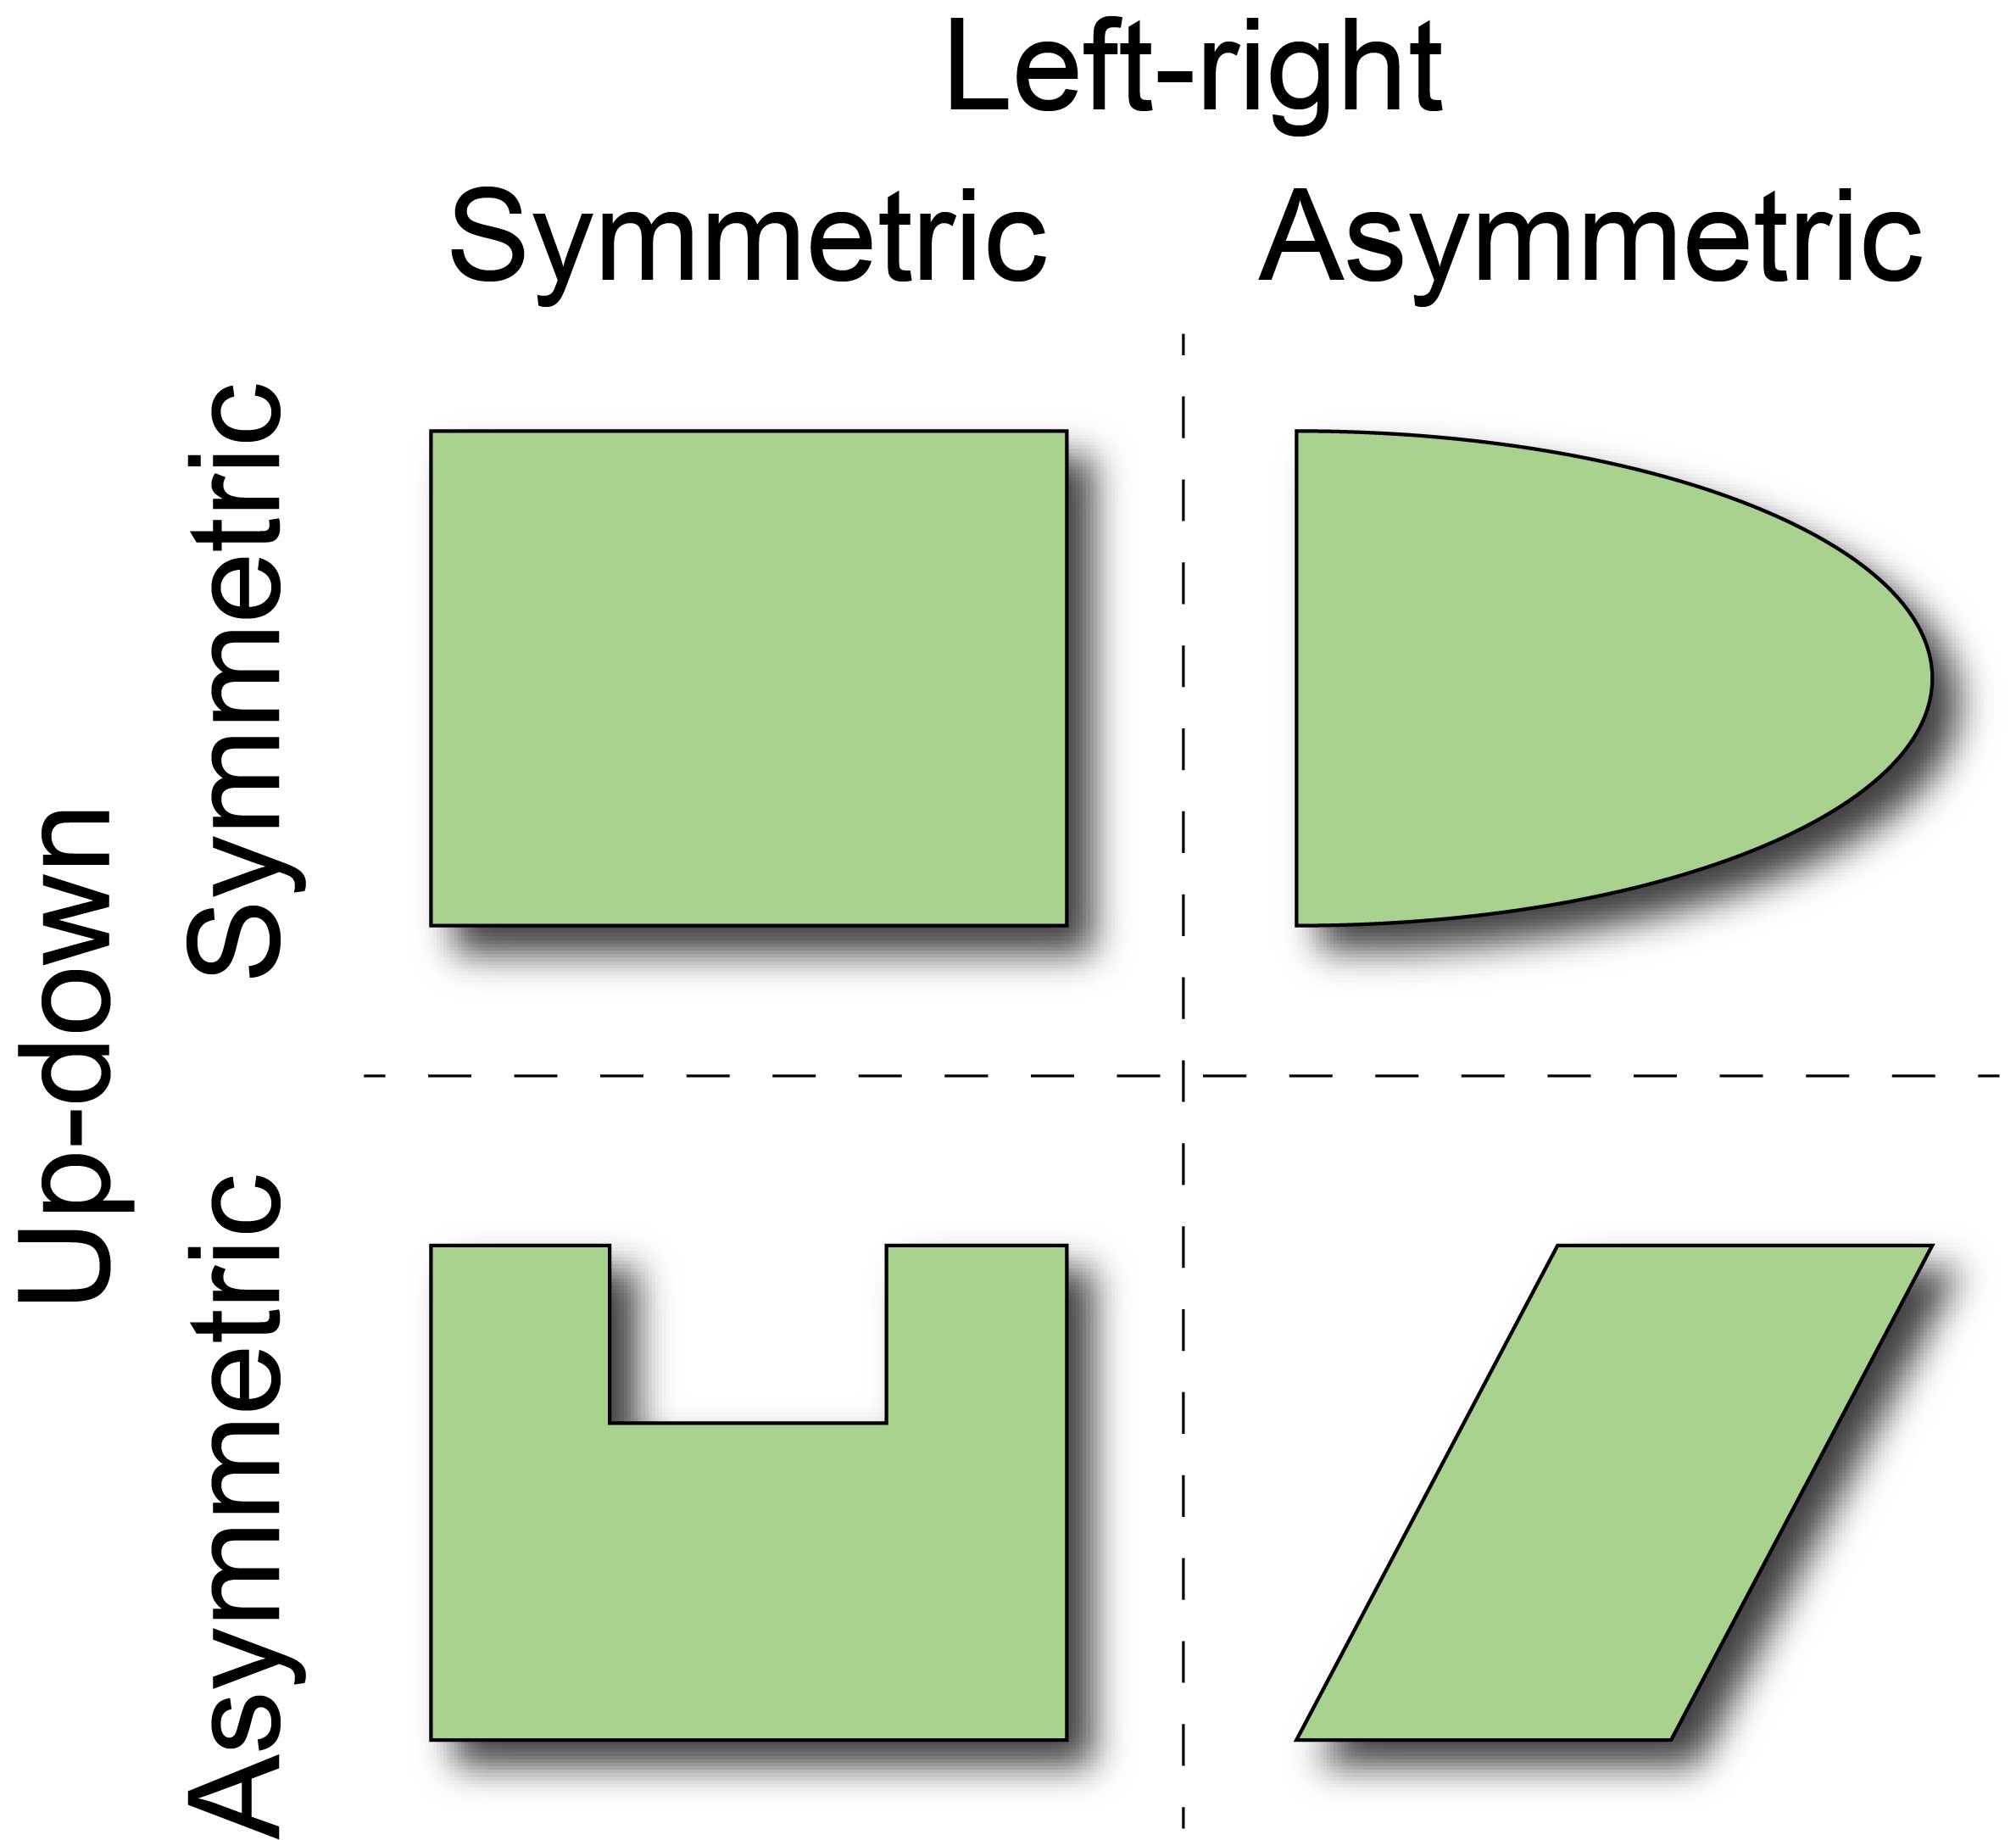 different types of symmetry shown in a square with left-right at the top and up-down on the left hand side, a square is shown as symmetric in both dimensions, then an oval cut in half as asymmetric from left-right, a box with a square cut out of the top is asymmetric up-down, and a slanted rectangle is asymmetric is both directions